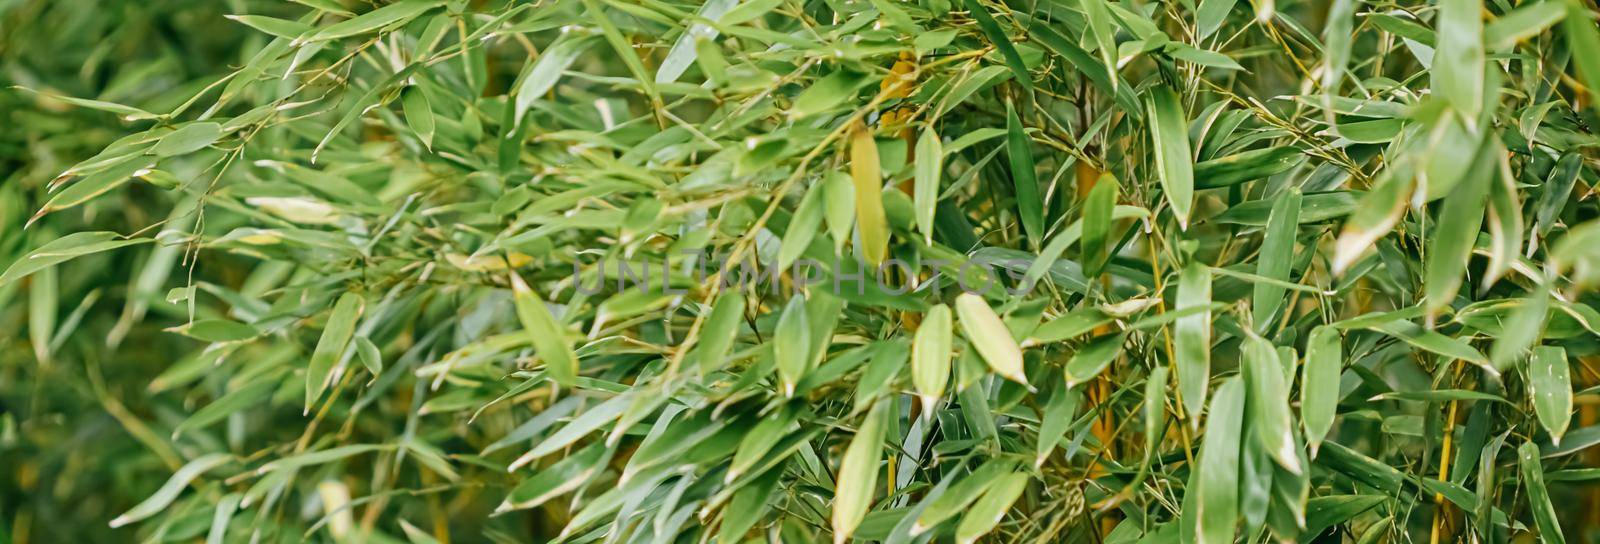 Bamboo background, fresh leaves on tree as nature, ecology and environment concept by Anneleven